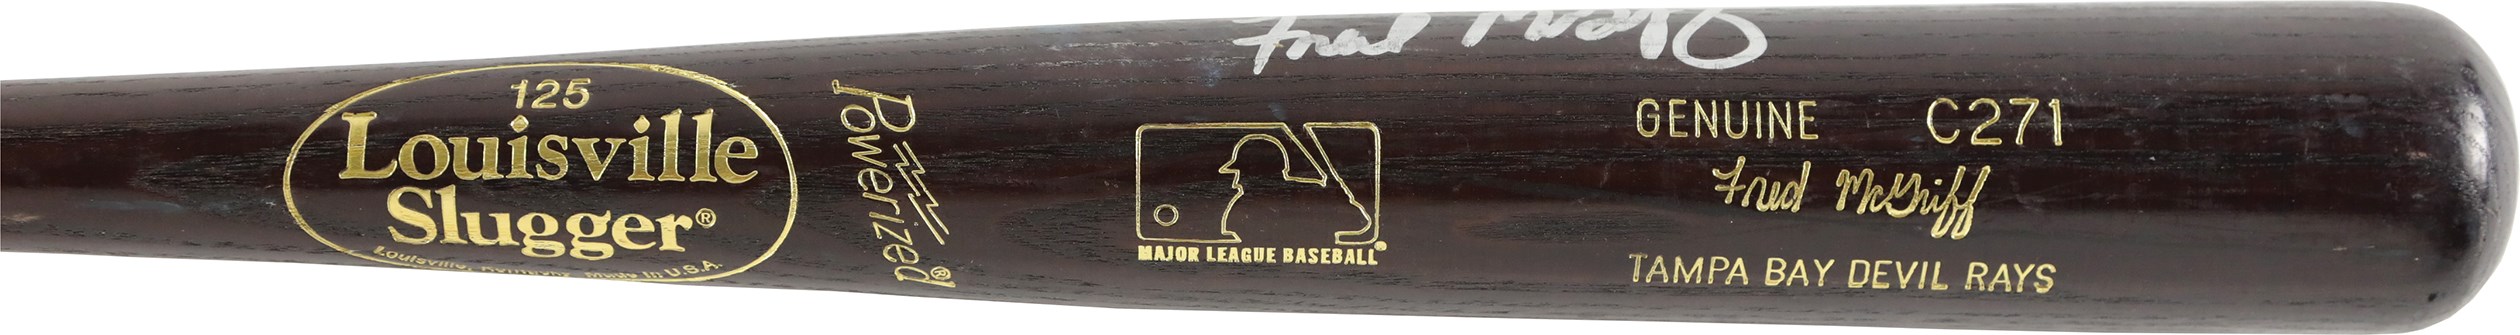 - 1998-2000 Fred McGriff Tampa Bay Devil Rays Signed Game Used Bat